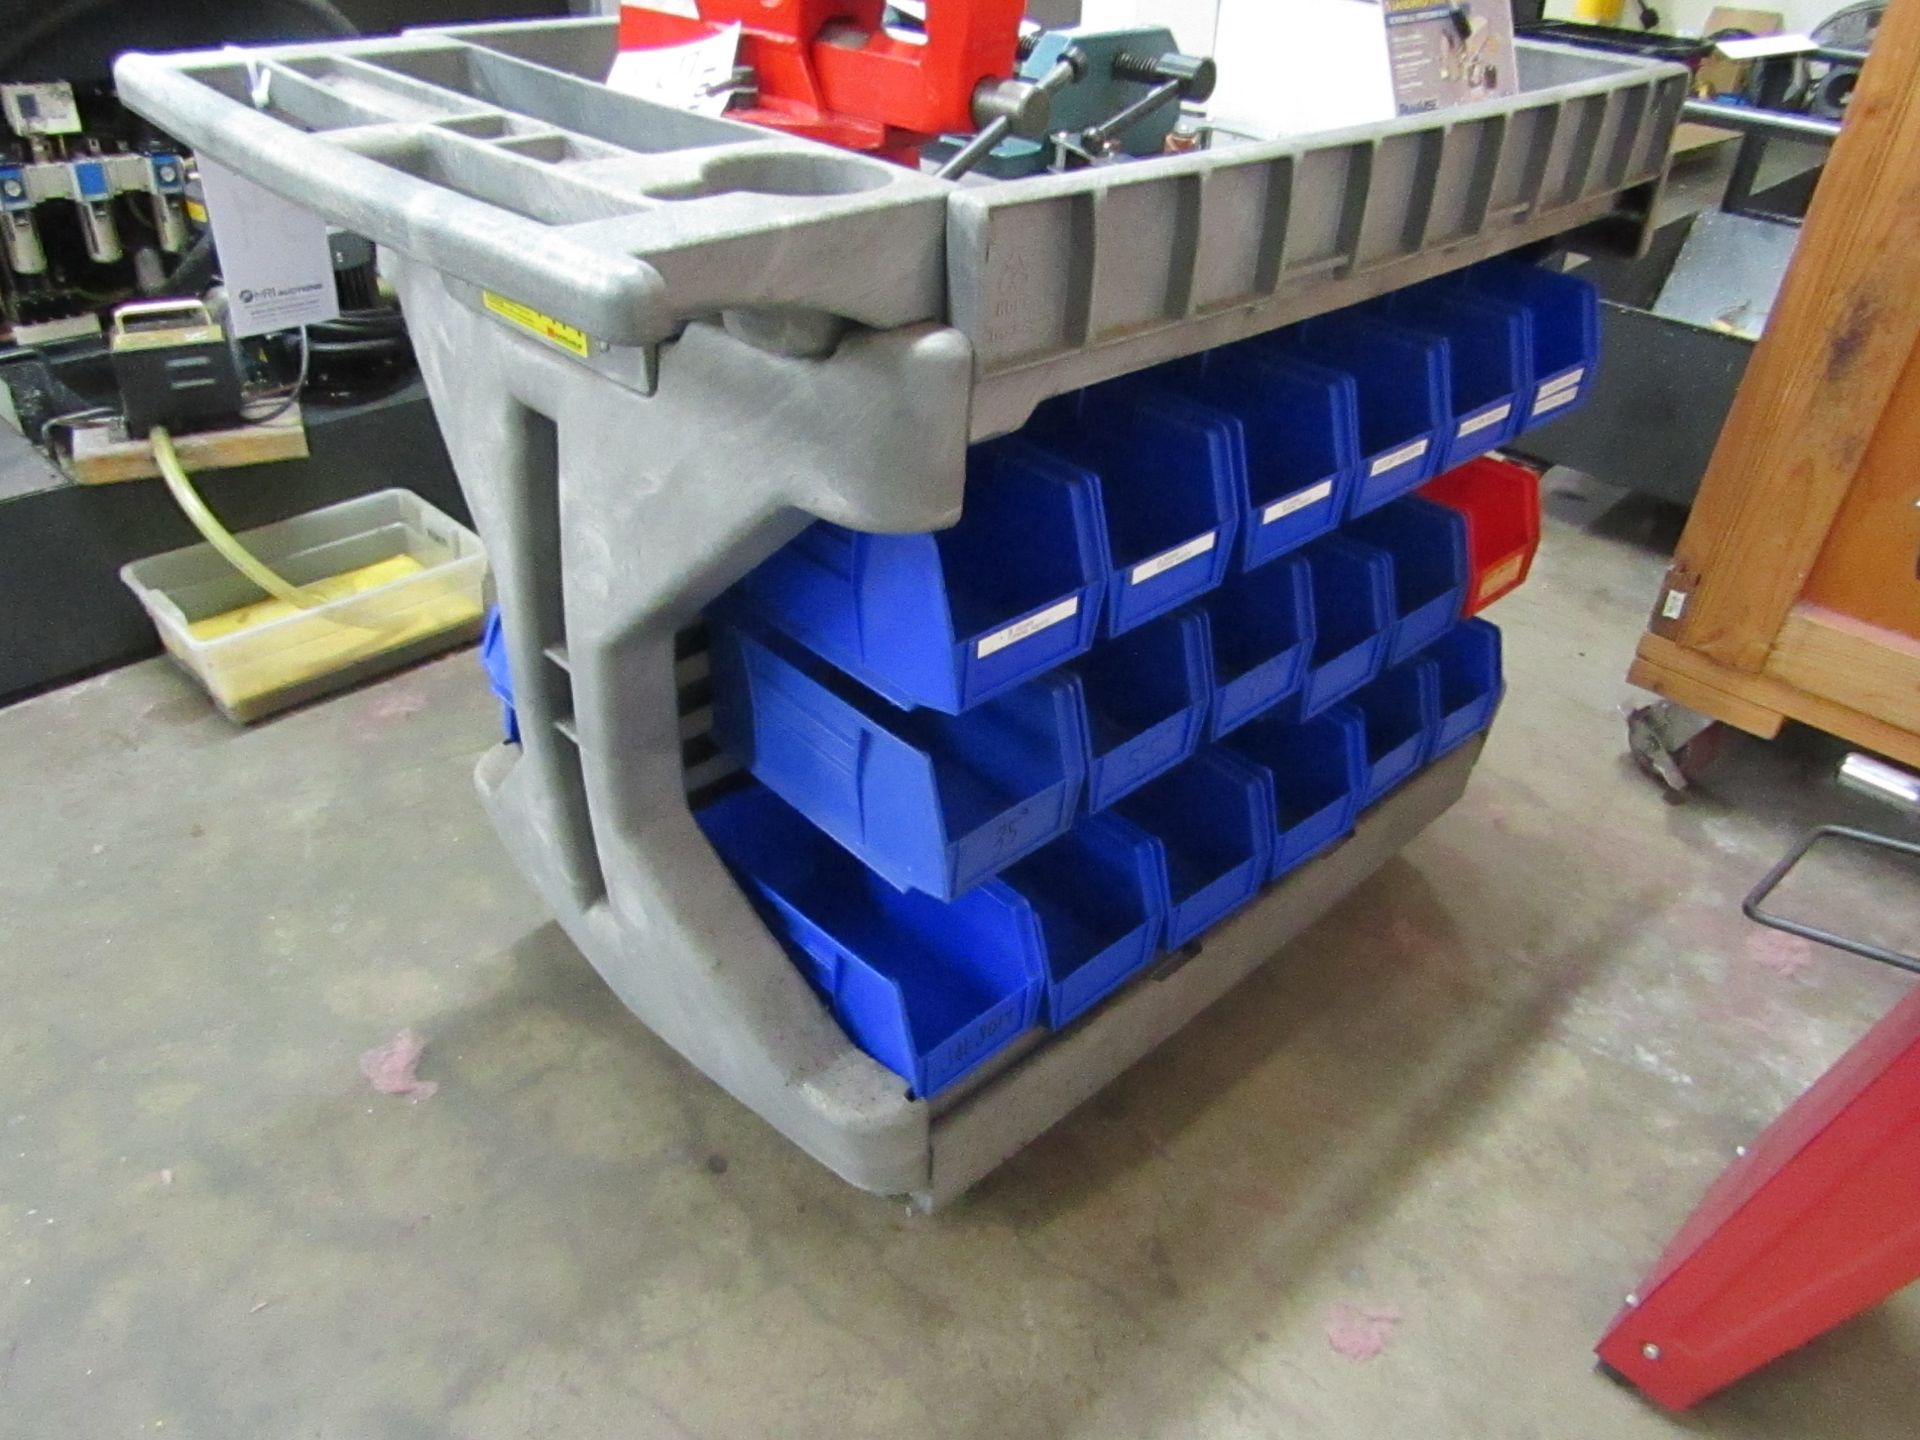 ULINE ROLLING WORK AND TOOL CART, (36) BLUE AND RED PLASTIC ORGANIZER BOXES - Image 2 of 2